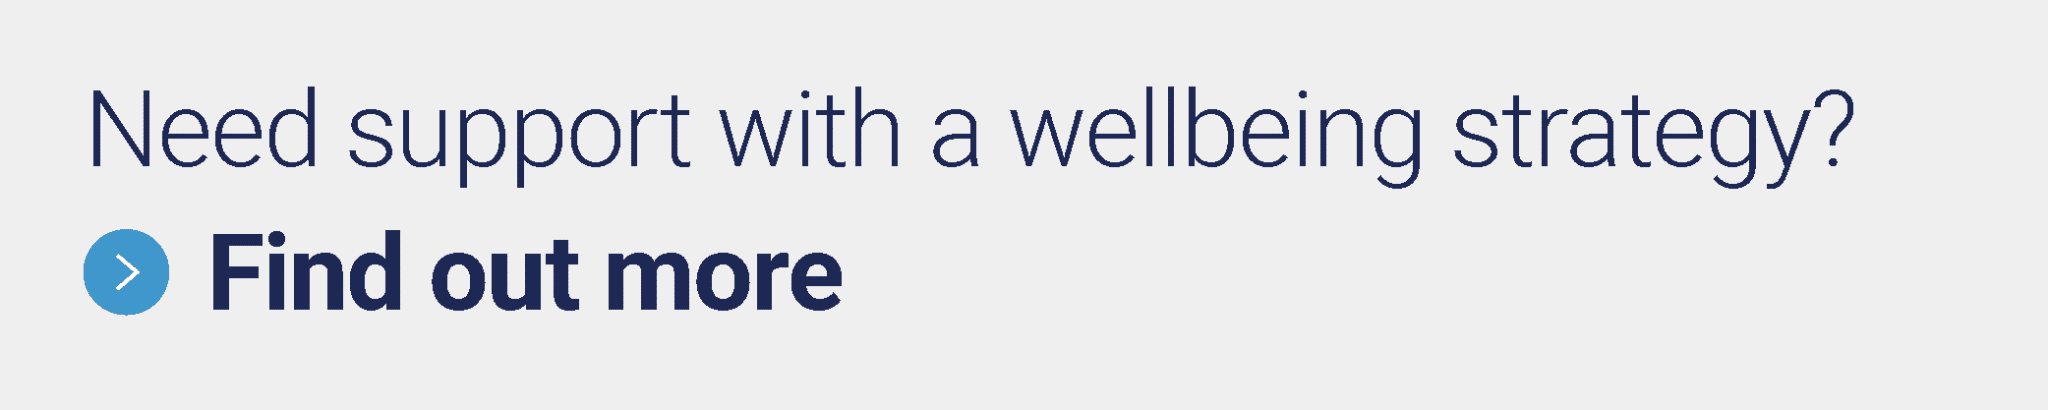 Need support with a wellbeing strategy?  Find out more